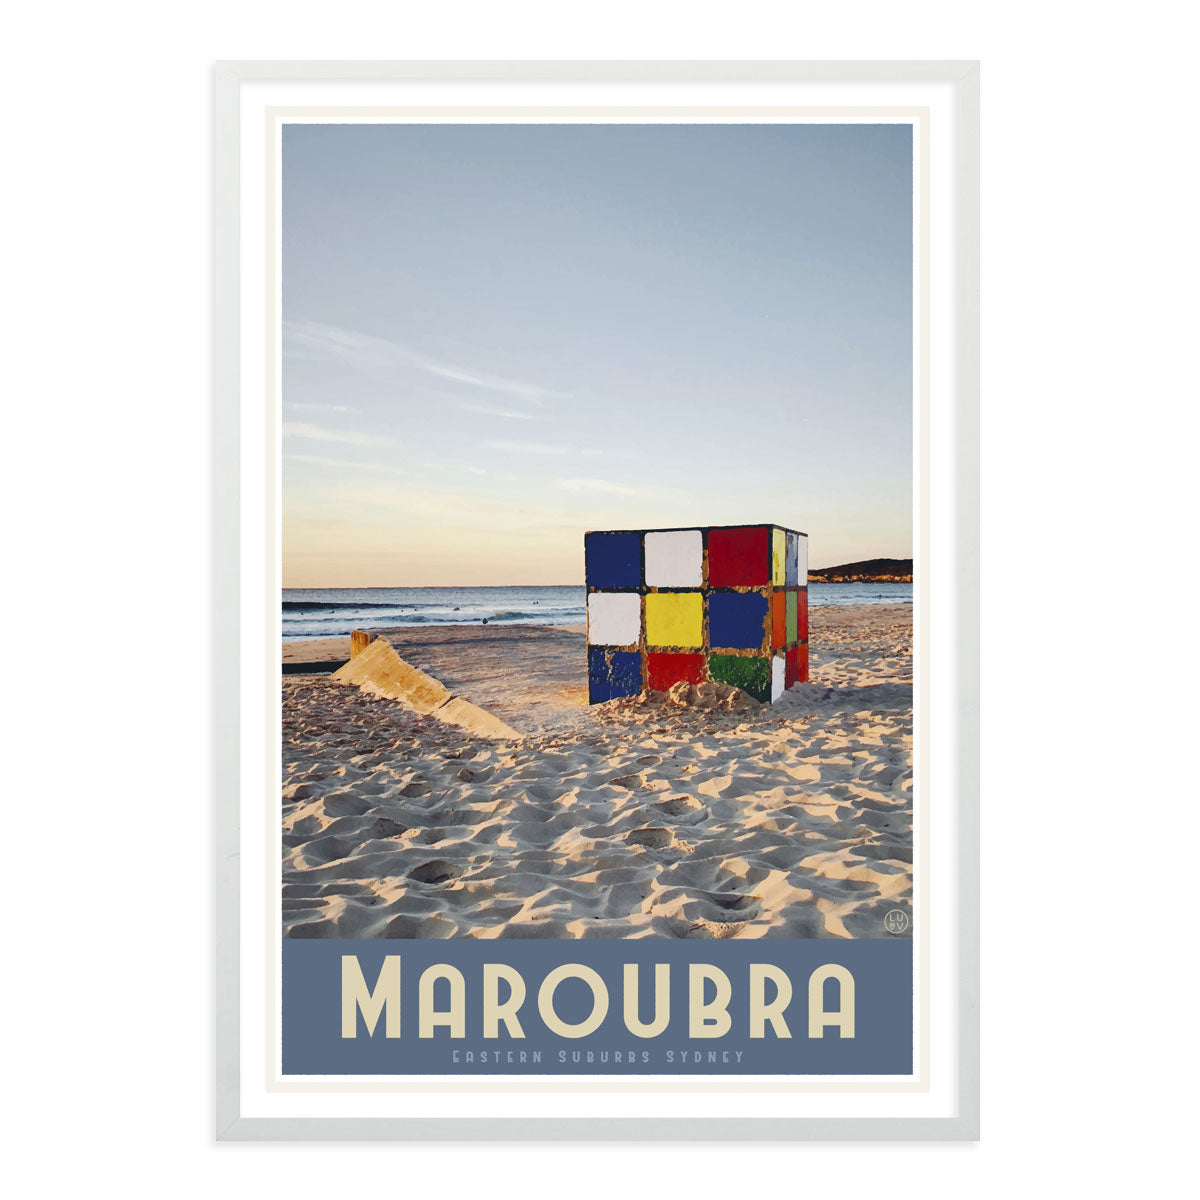 Maroubra cube vintage style white framed travel print by places we luv